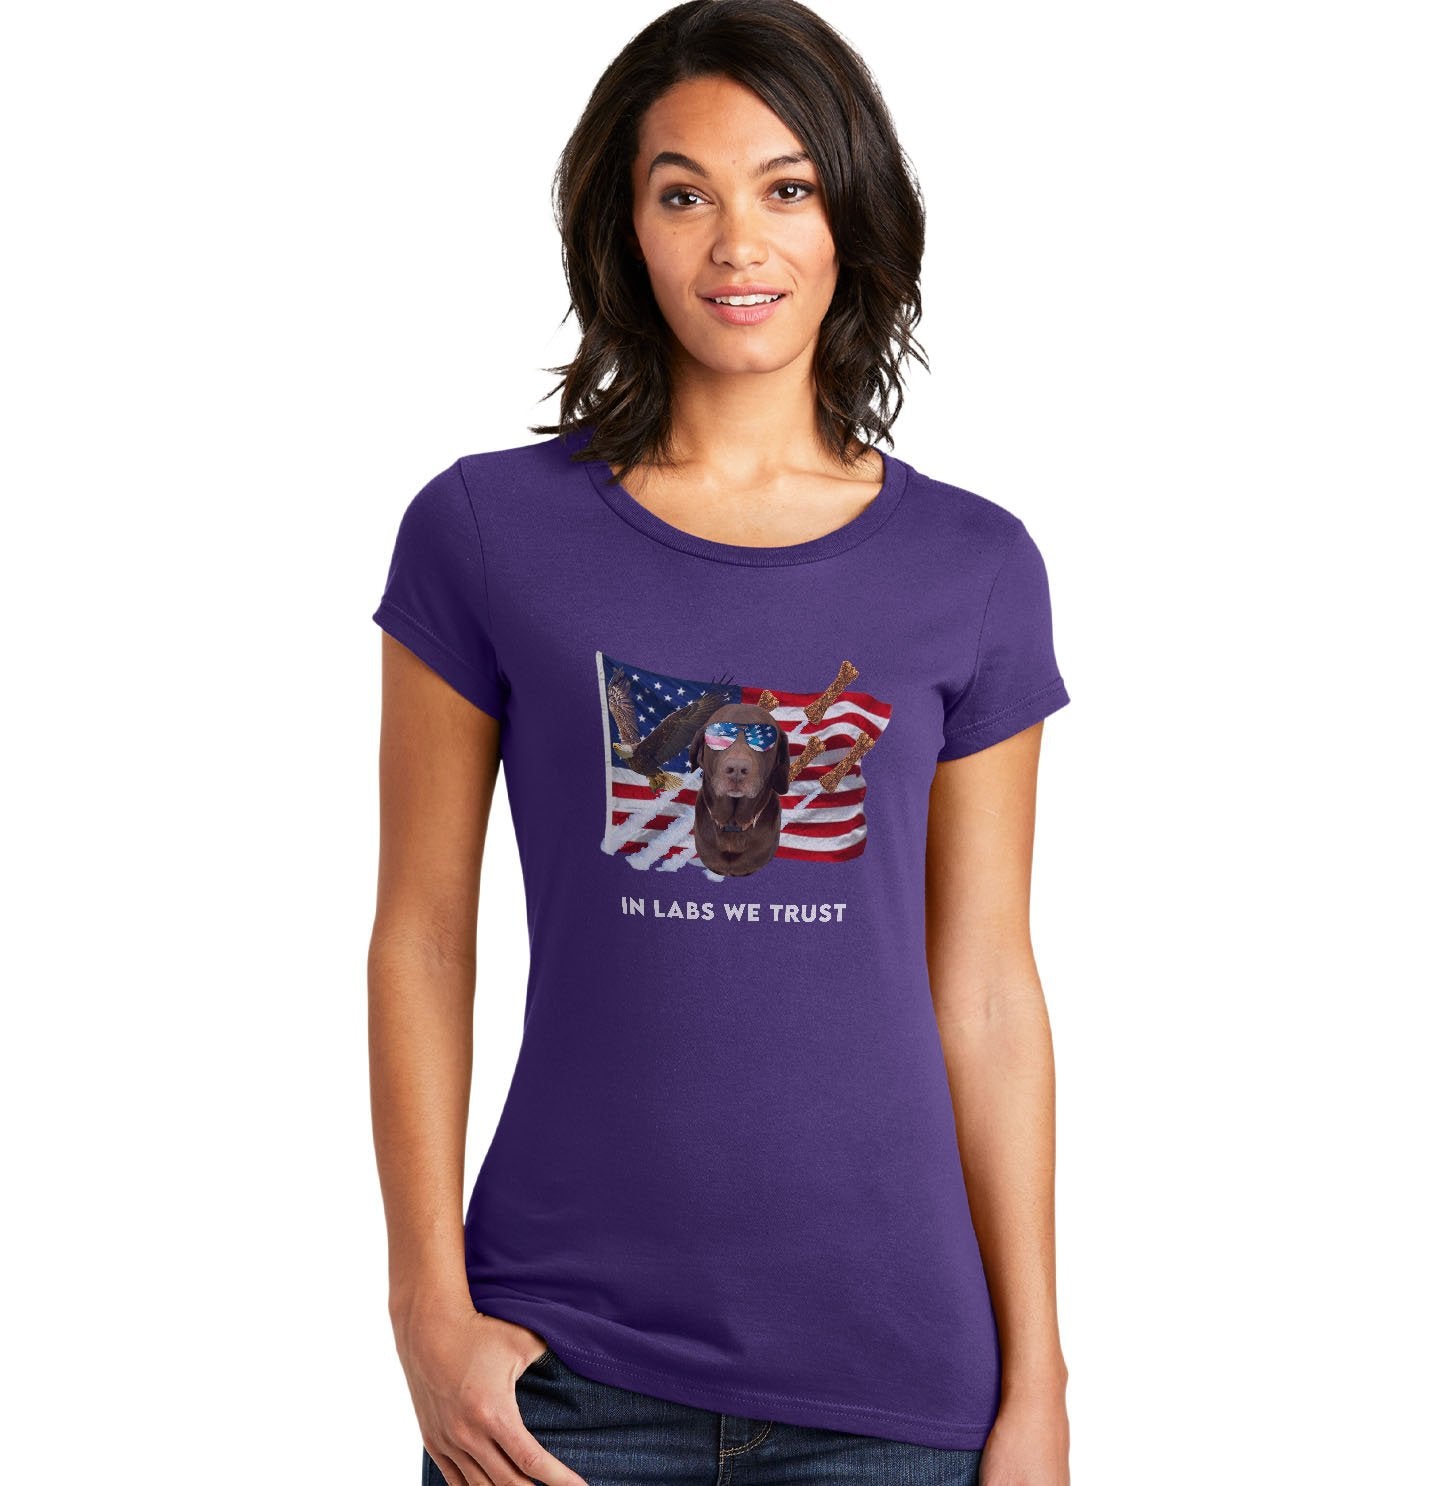 In Lab we Trust Chocolate - Women's Fitted T-Shirt